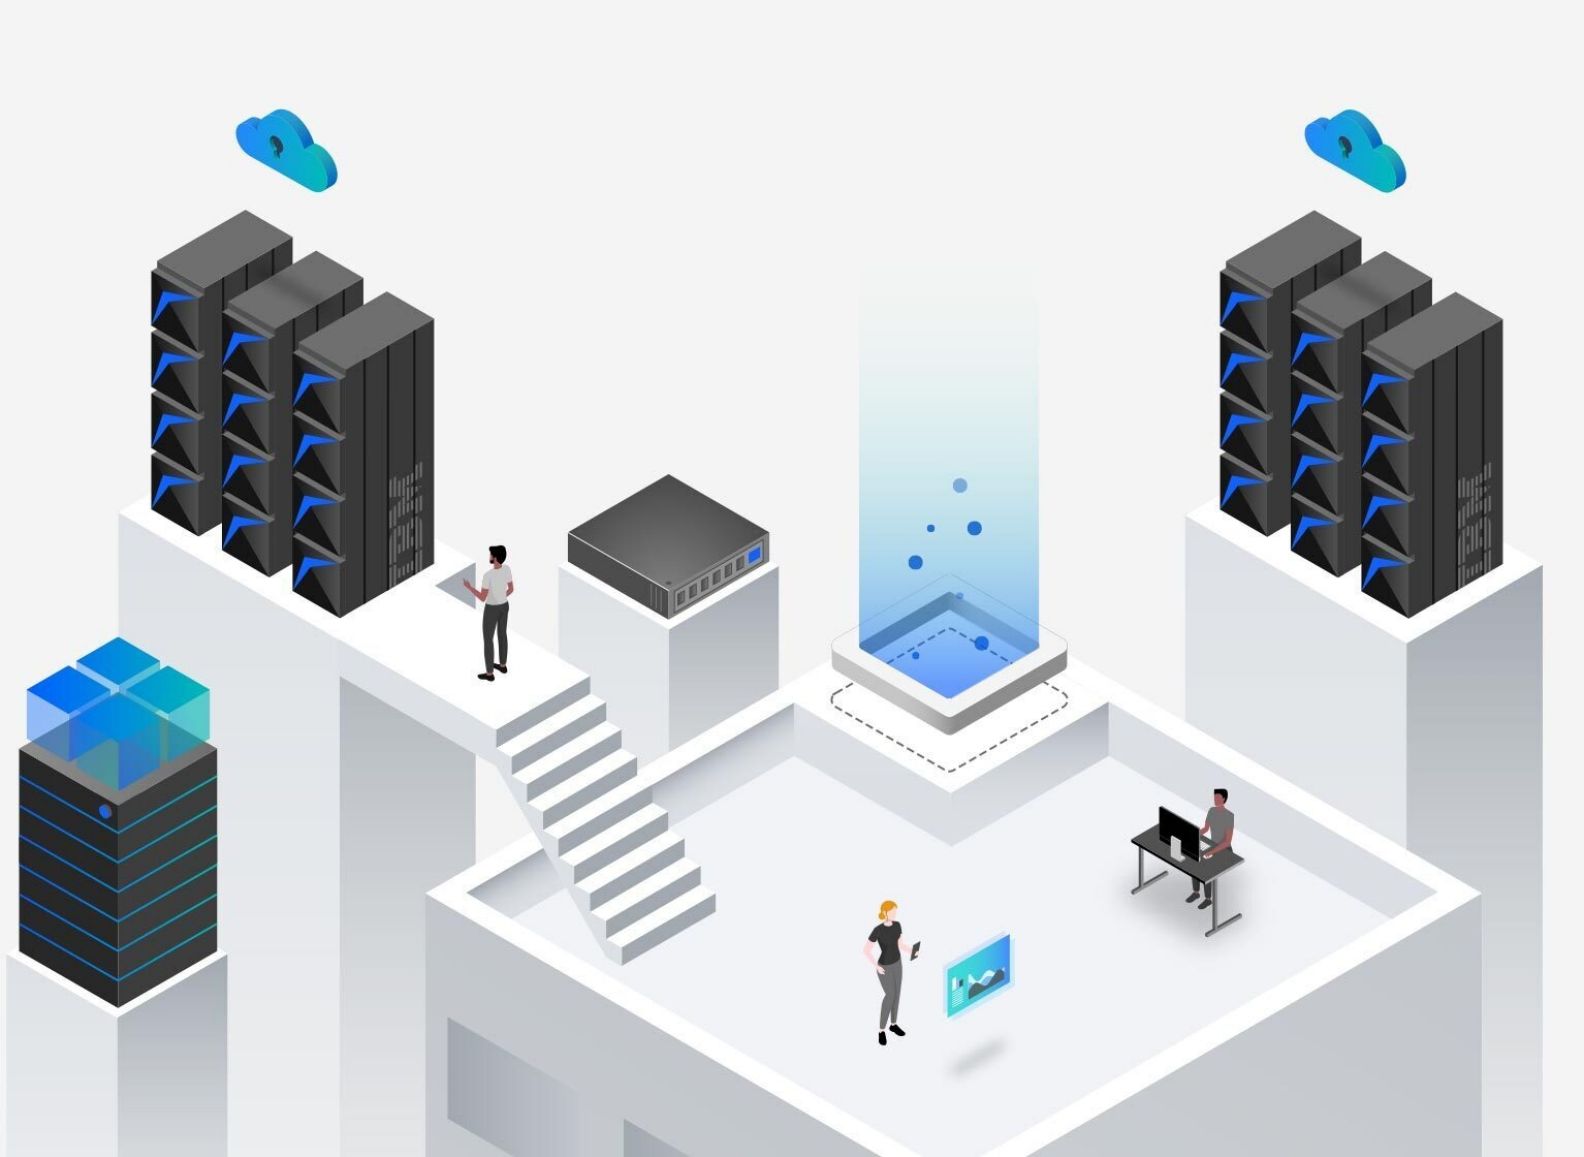 Isometric illustration depicting people interacting with a flash storage system